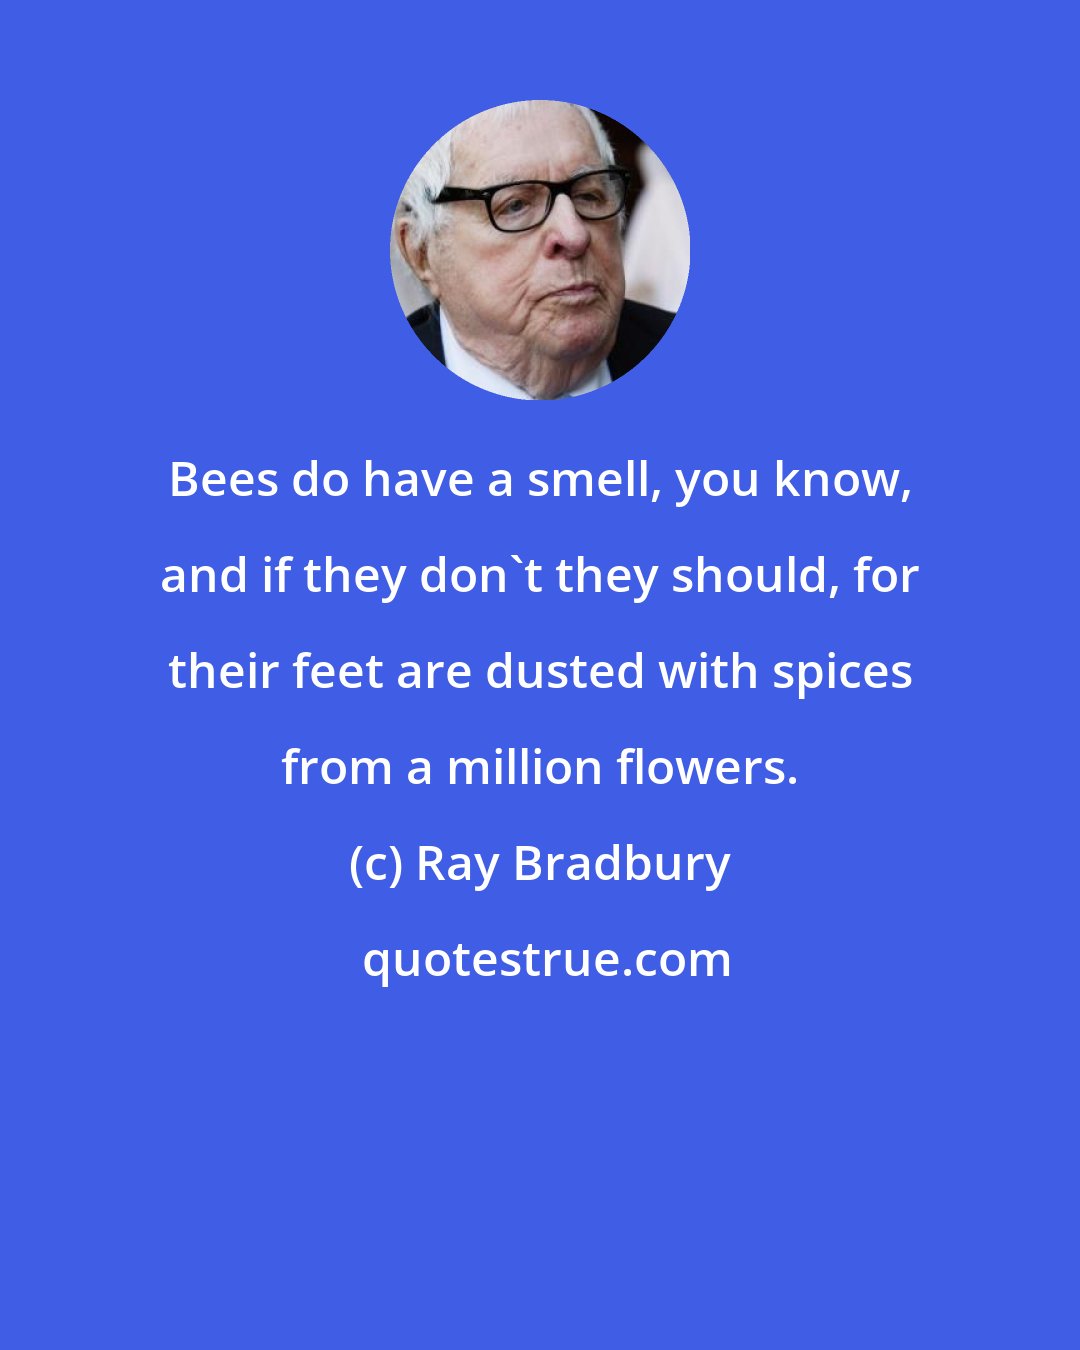 Ray Bradbury: Bees do have a smell, you know, and if they don't they should, for their feet are dusted with spices from a million flowers.